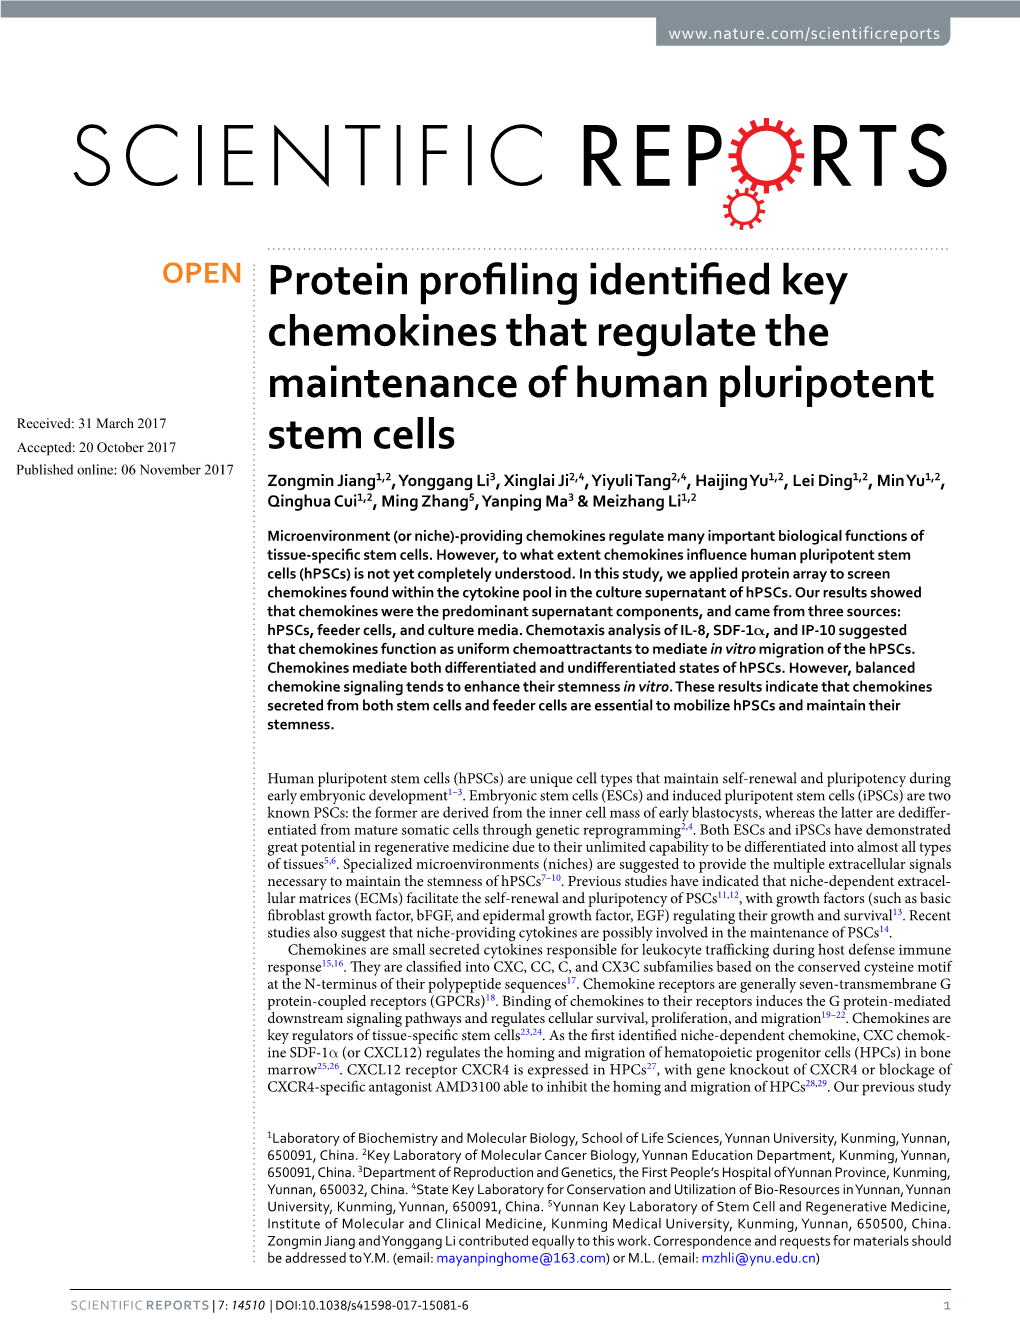 Protein Profiling Identified Key Chemokines That Regulate The